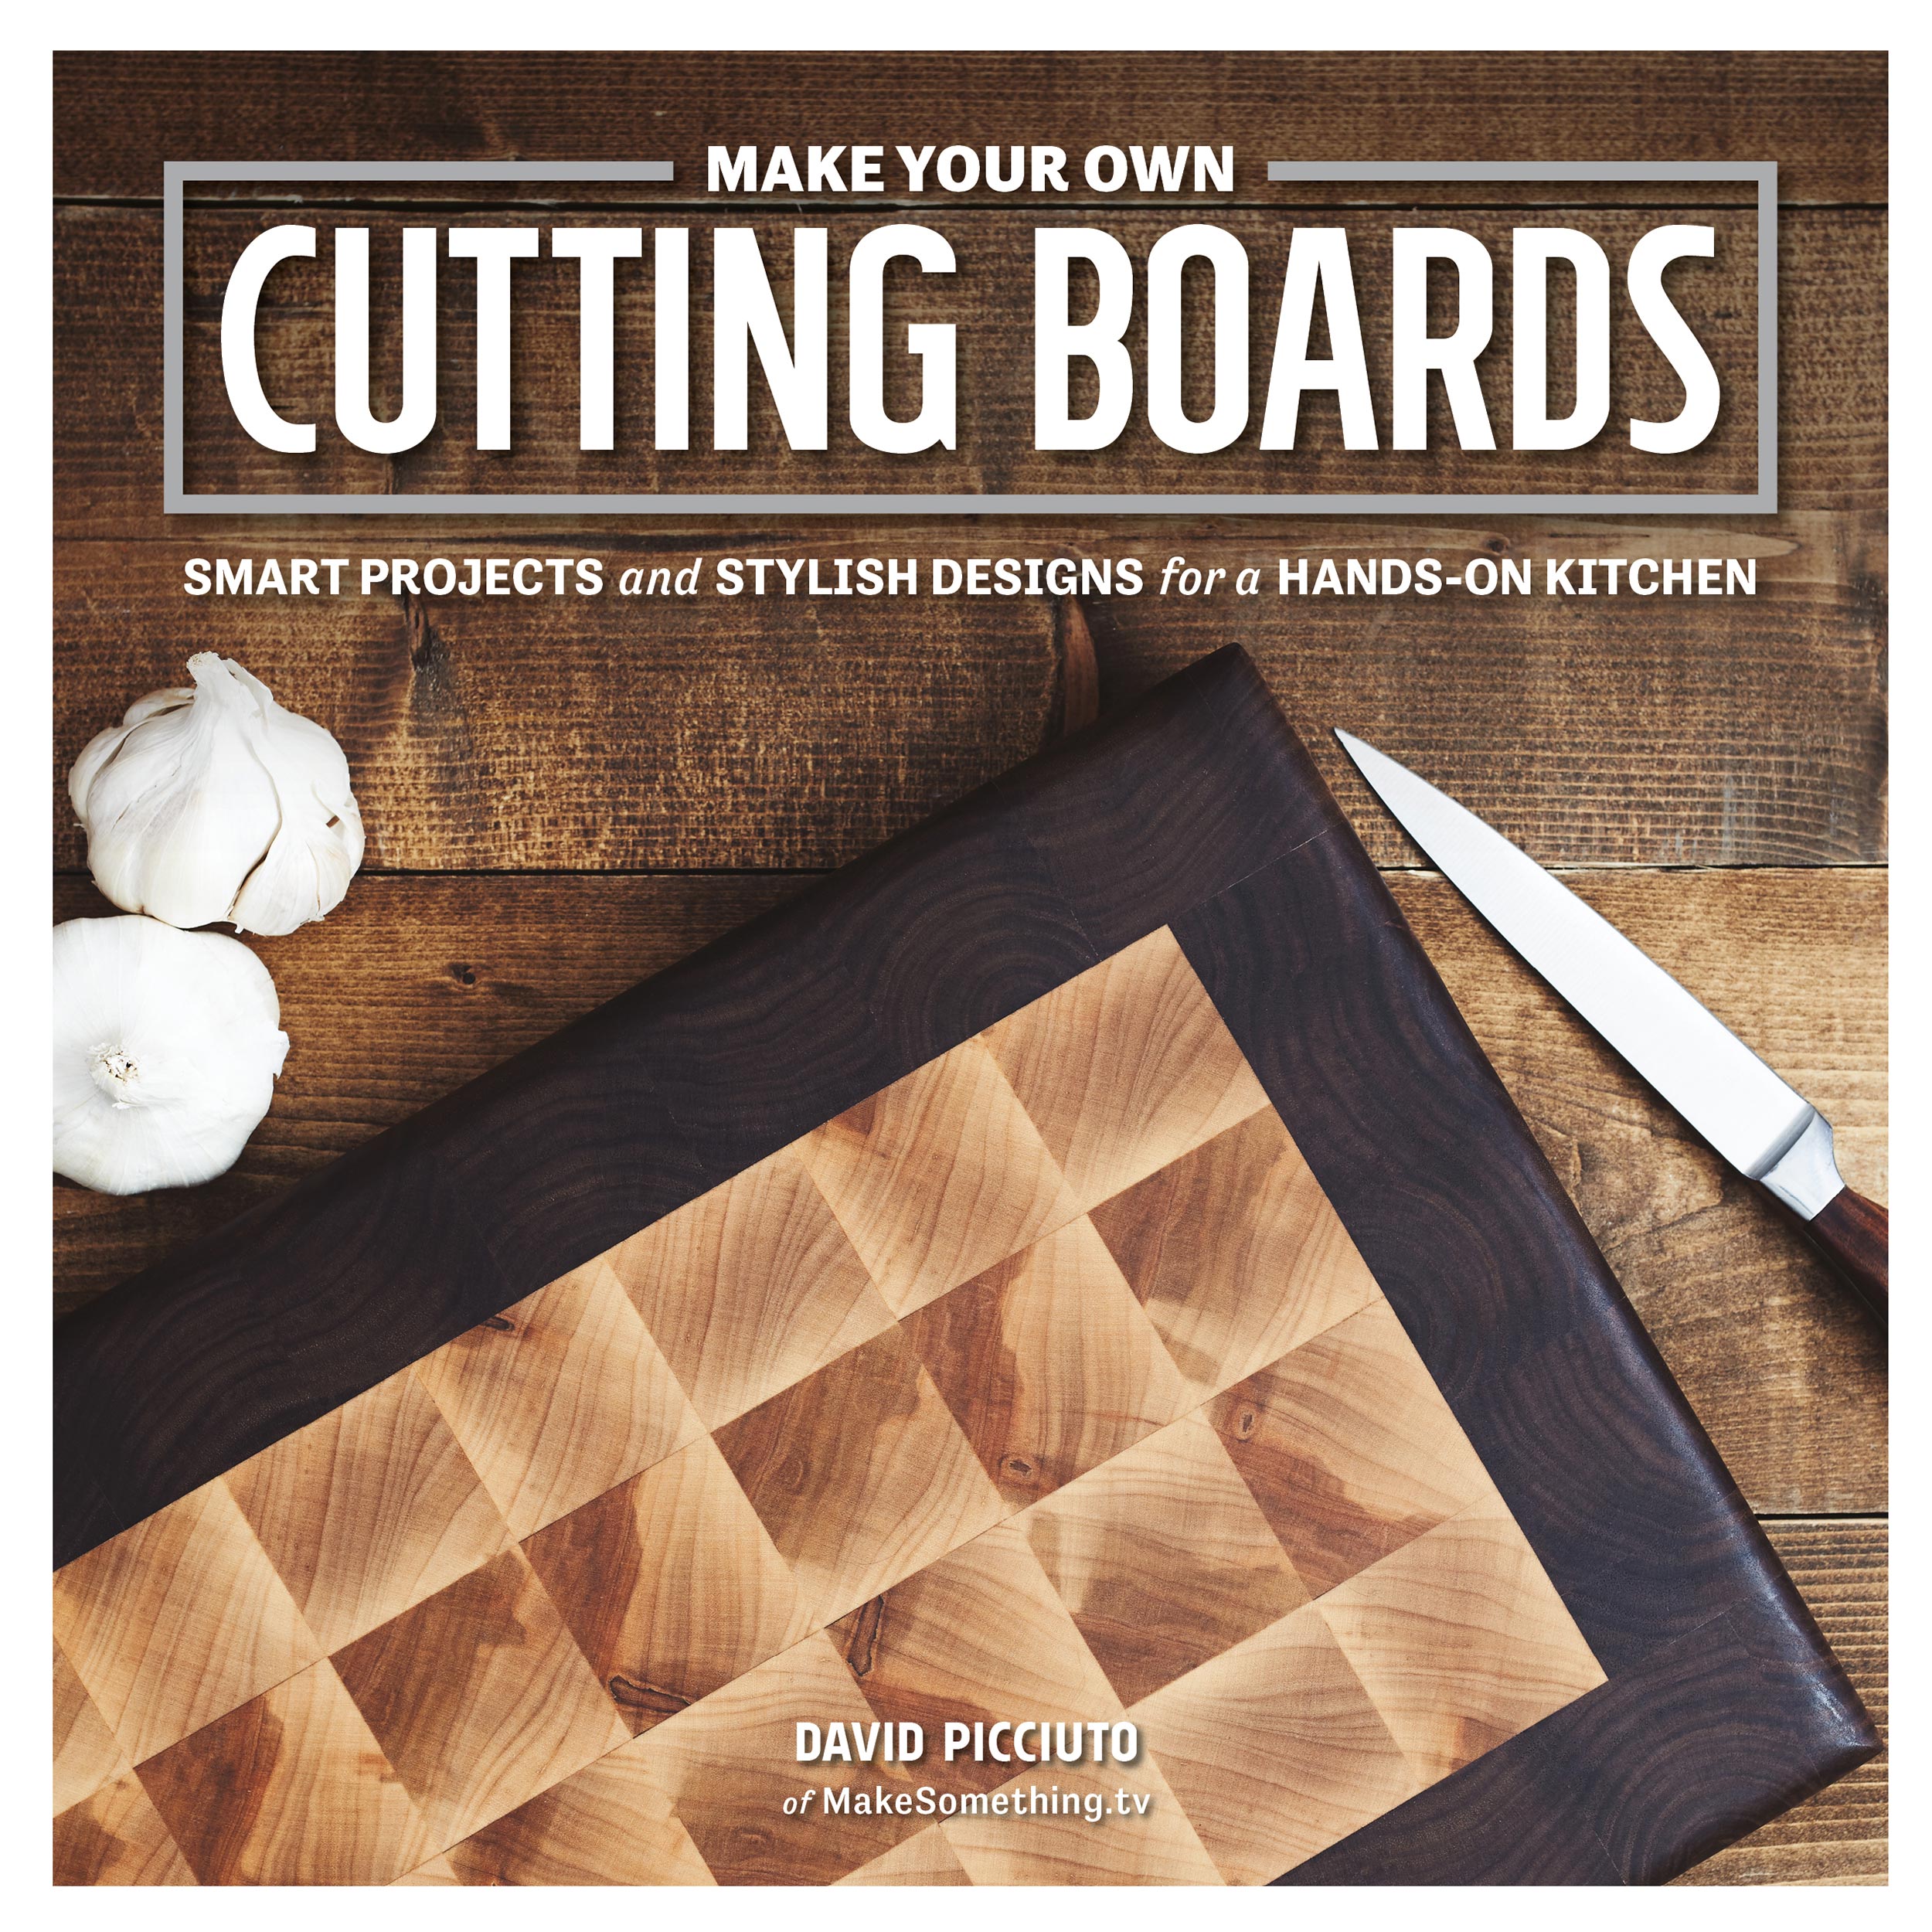 Make Your Own Cutting Boards